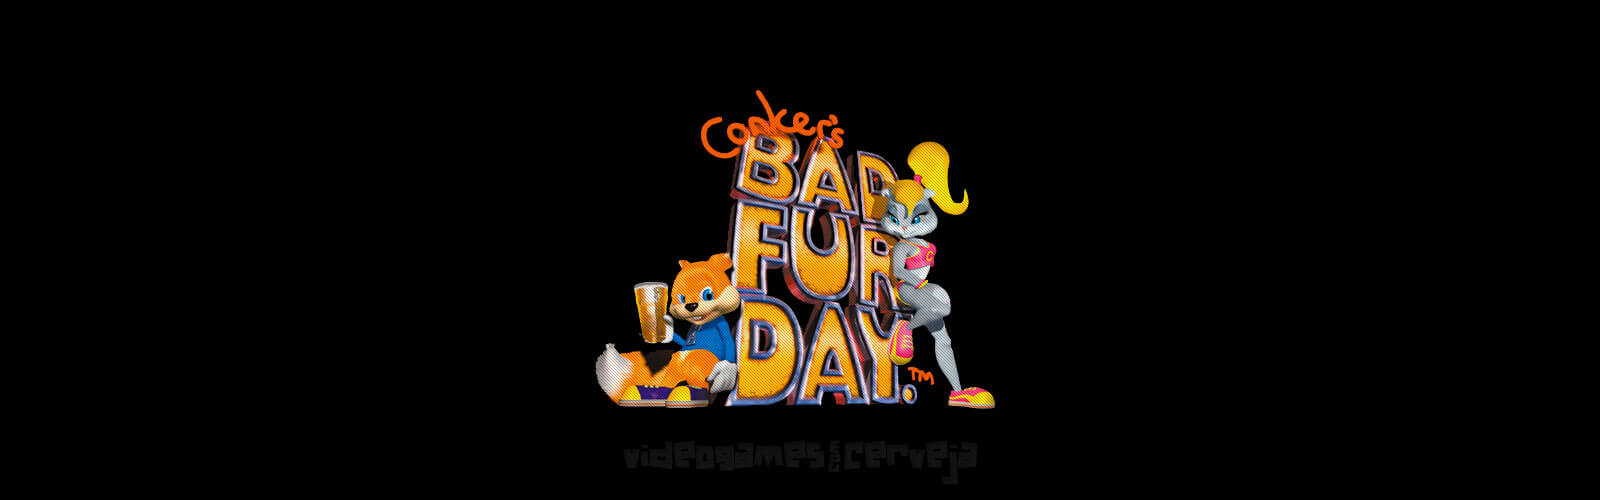 Análise - Conker's Bad Fur Day Cover